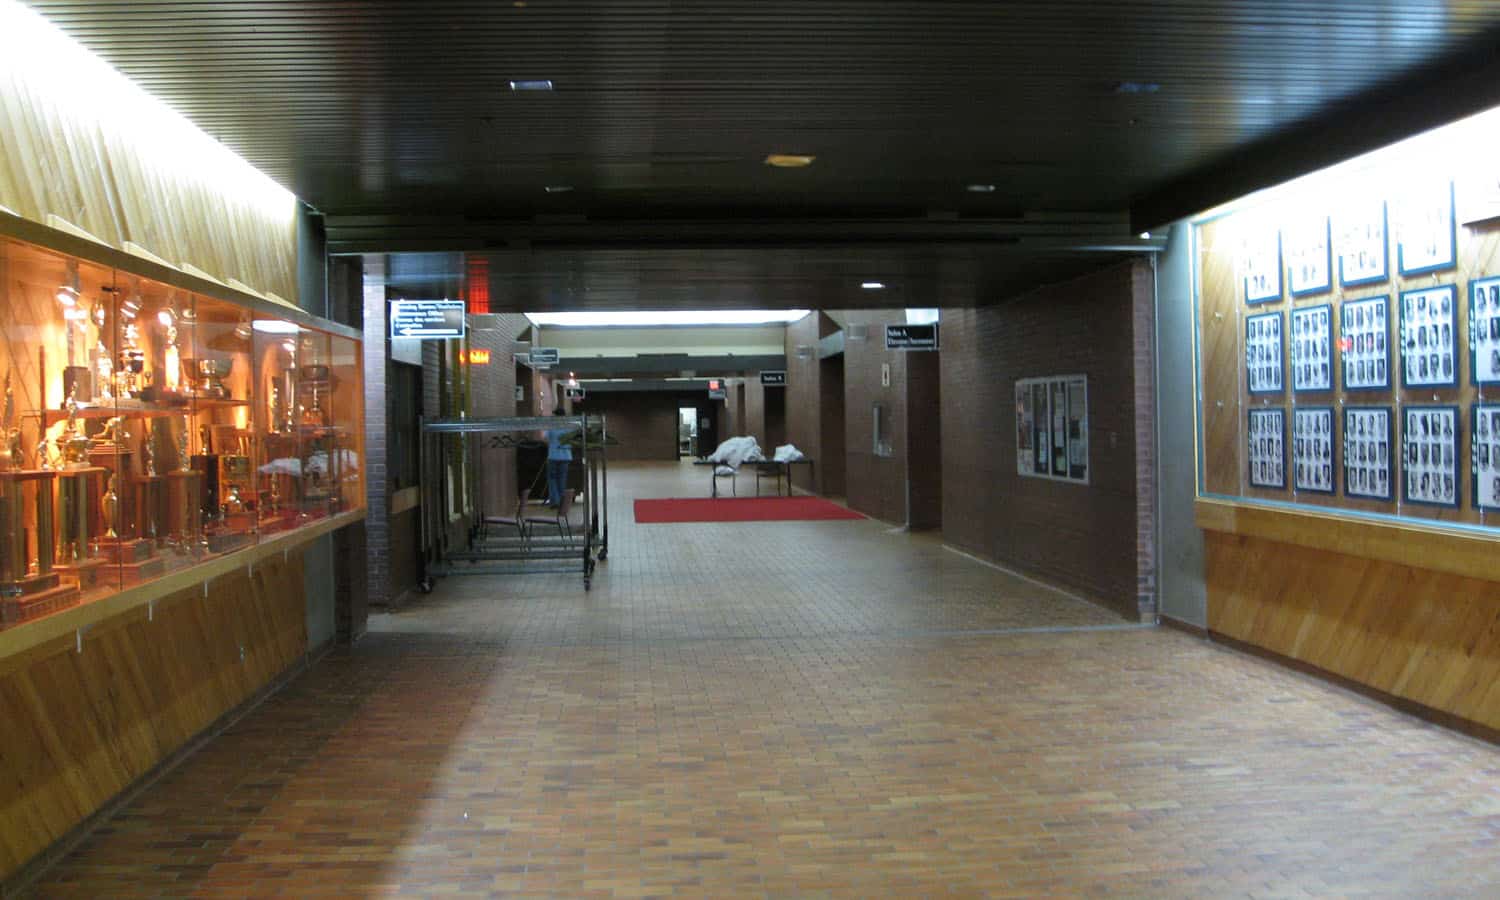 Lower level concourse (typically not used during games)